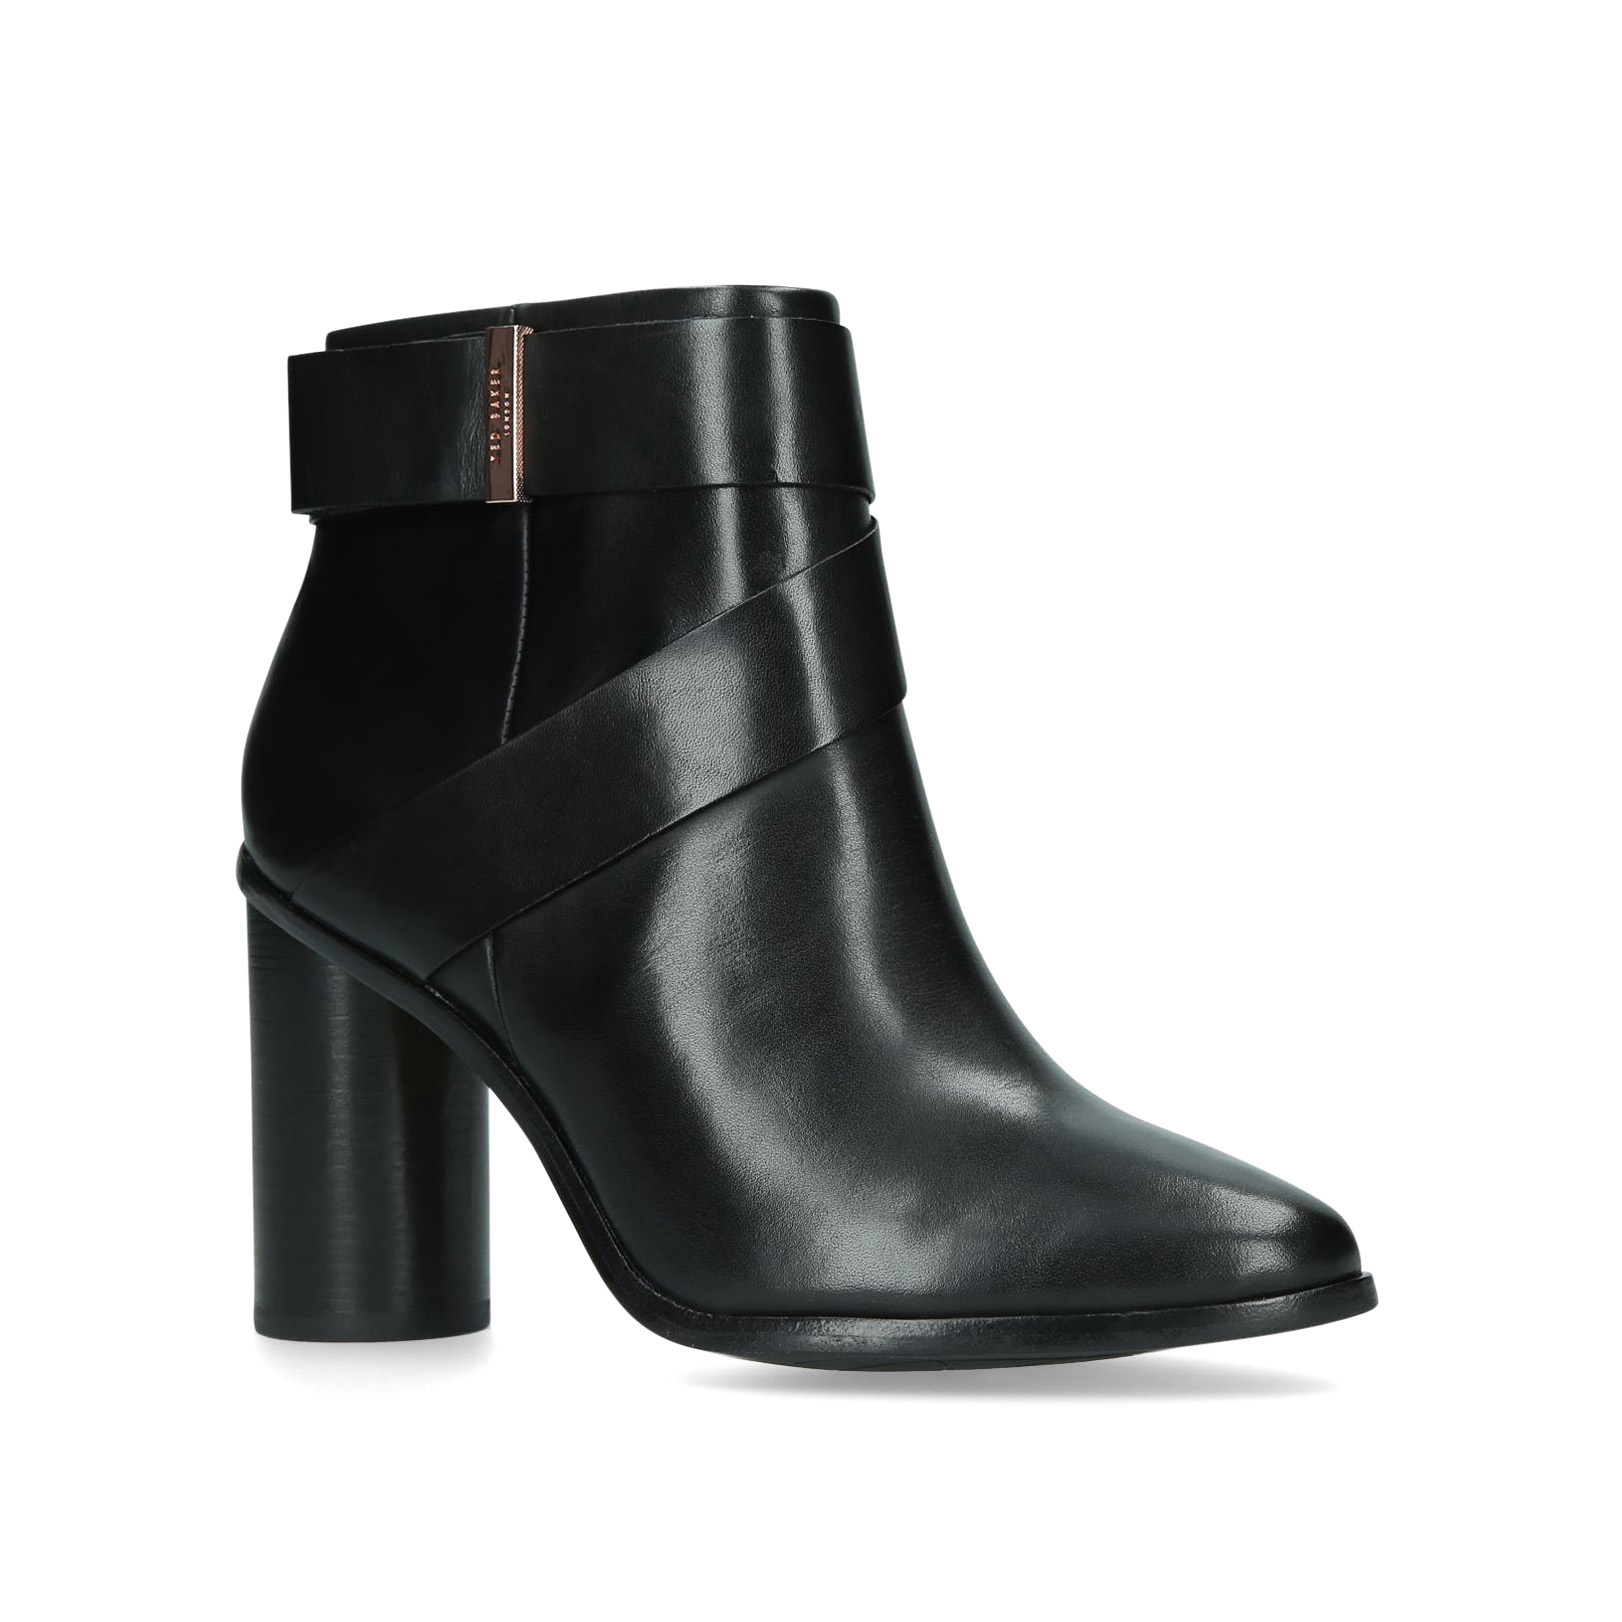 MATYNA - TED BAKER Boots